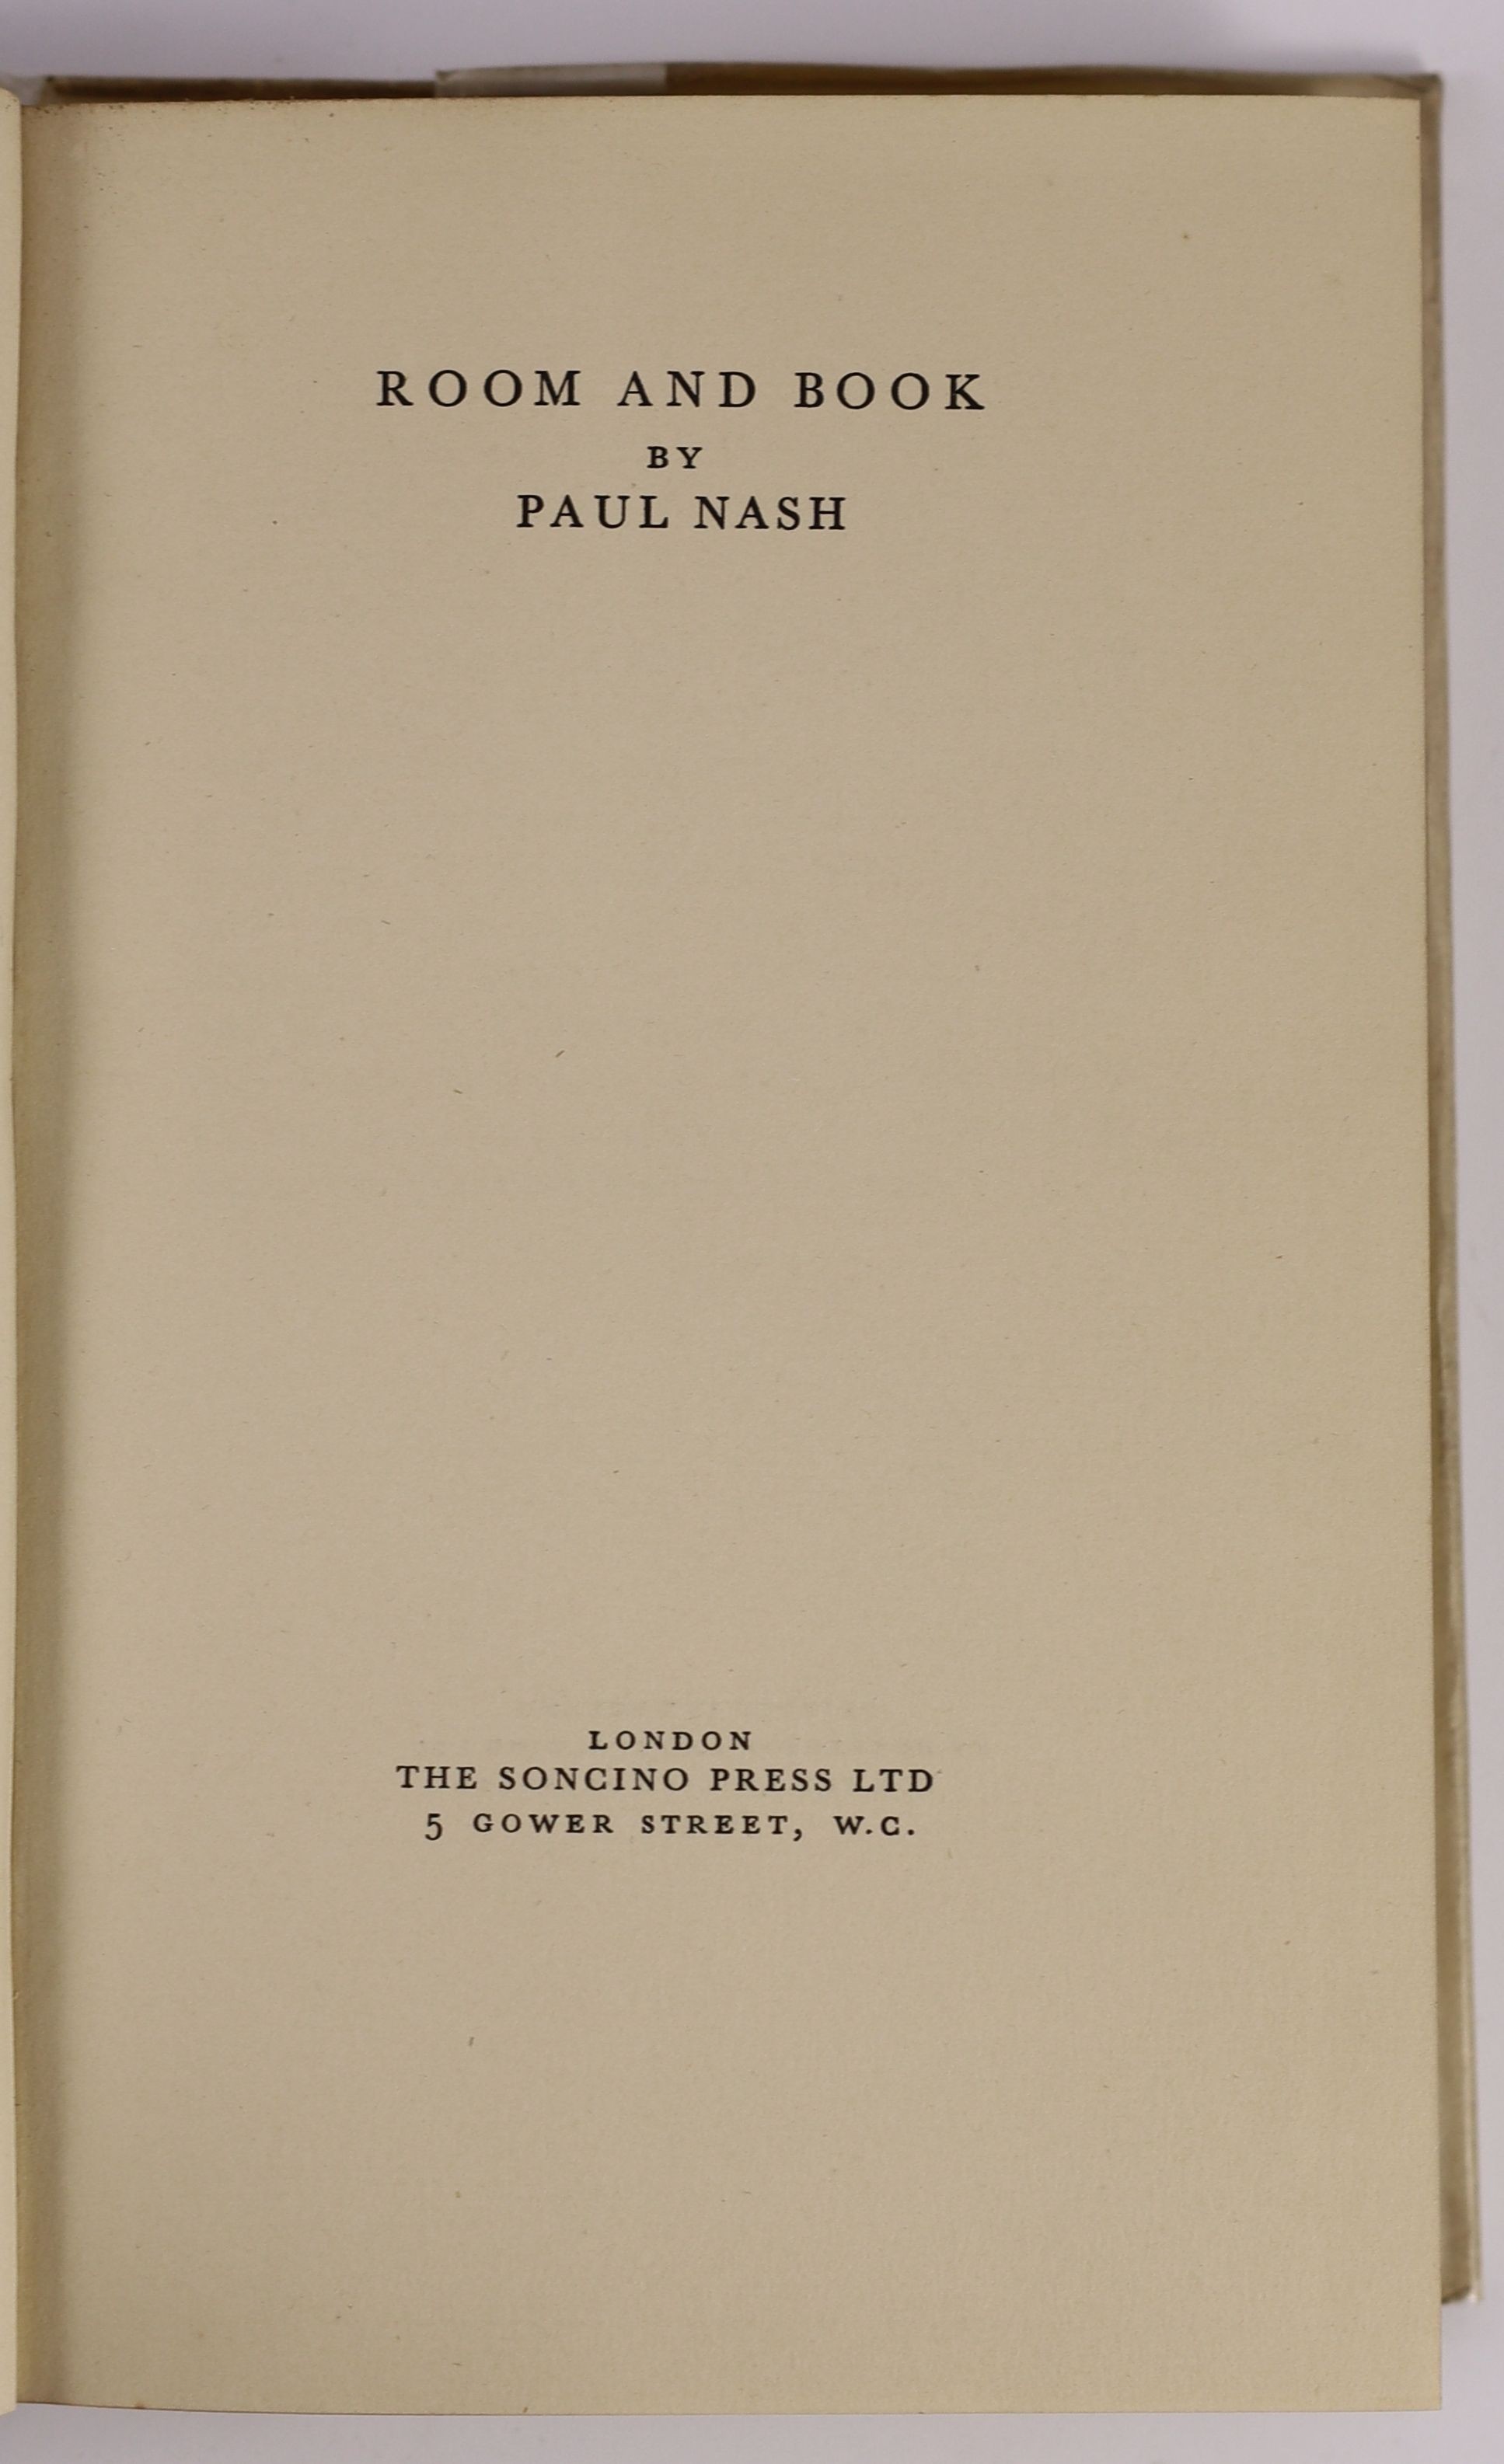 Nash, Paul - Room and Book. 1st edition. Complete with 18 illustrated plates plus numerous illustrations in the text, some of which are coloured or tipped-in. Publishers buckram with letters direct on spine. Original d/j